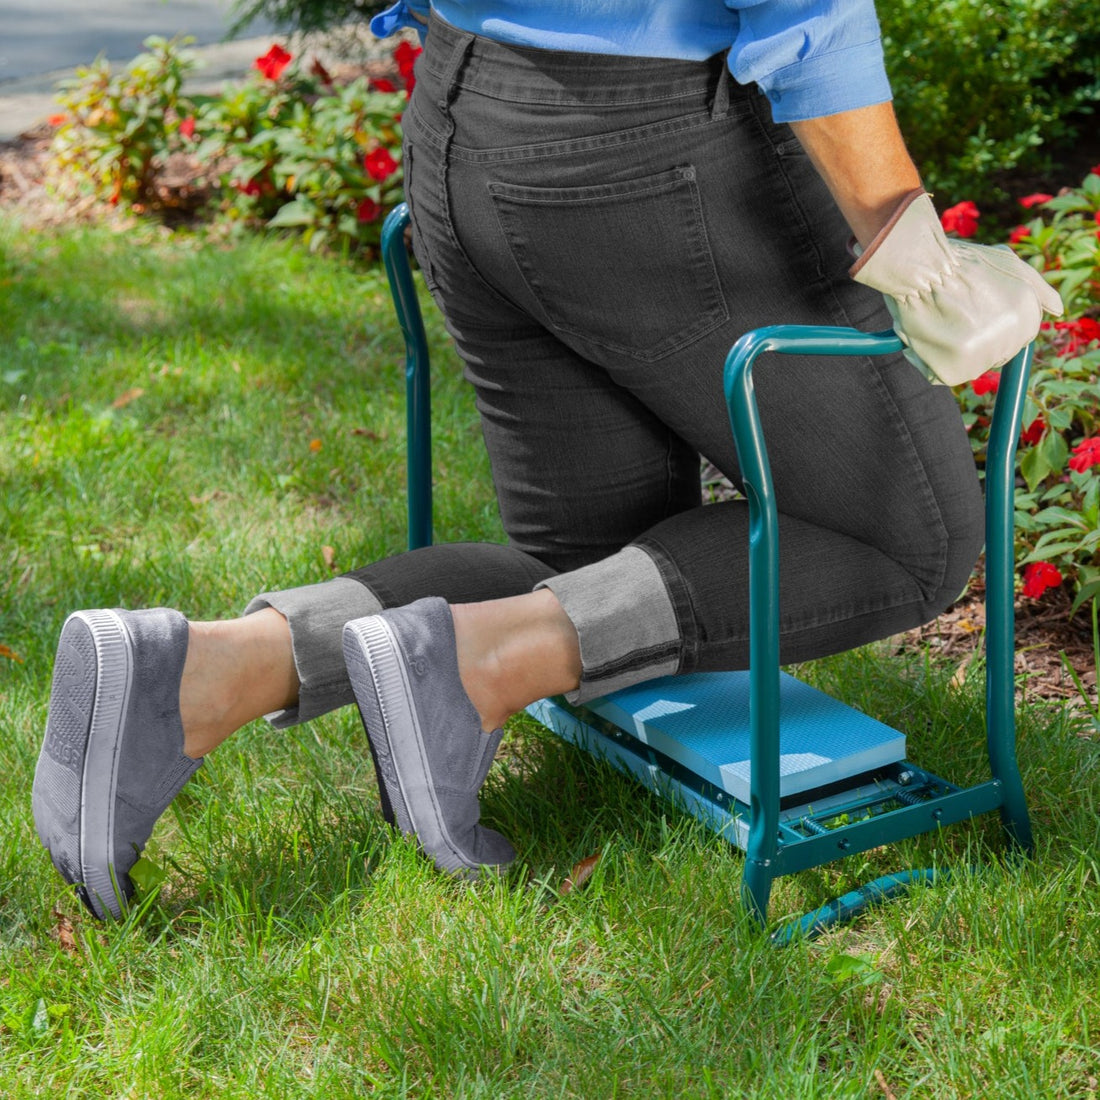 Garden Kneeler in use with woman using as kneeler pushing up to stand